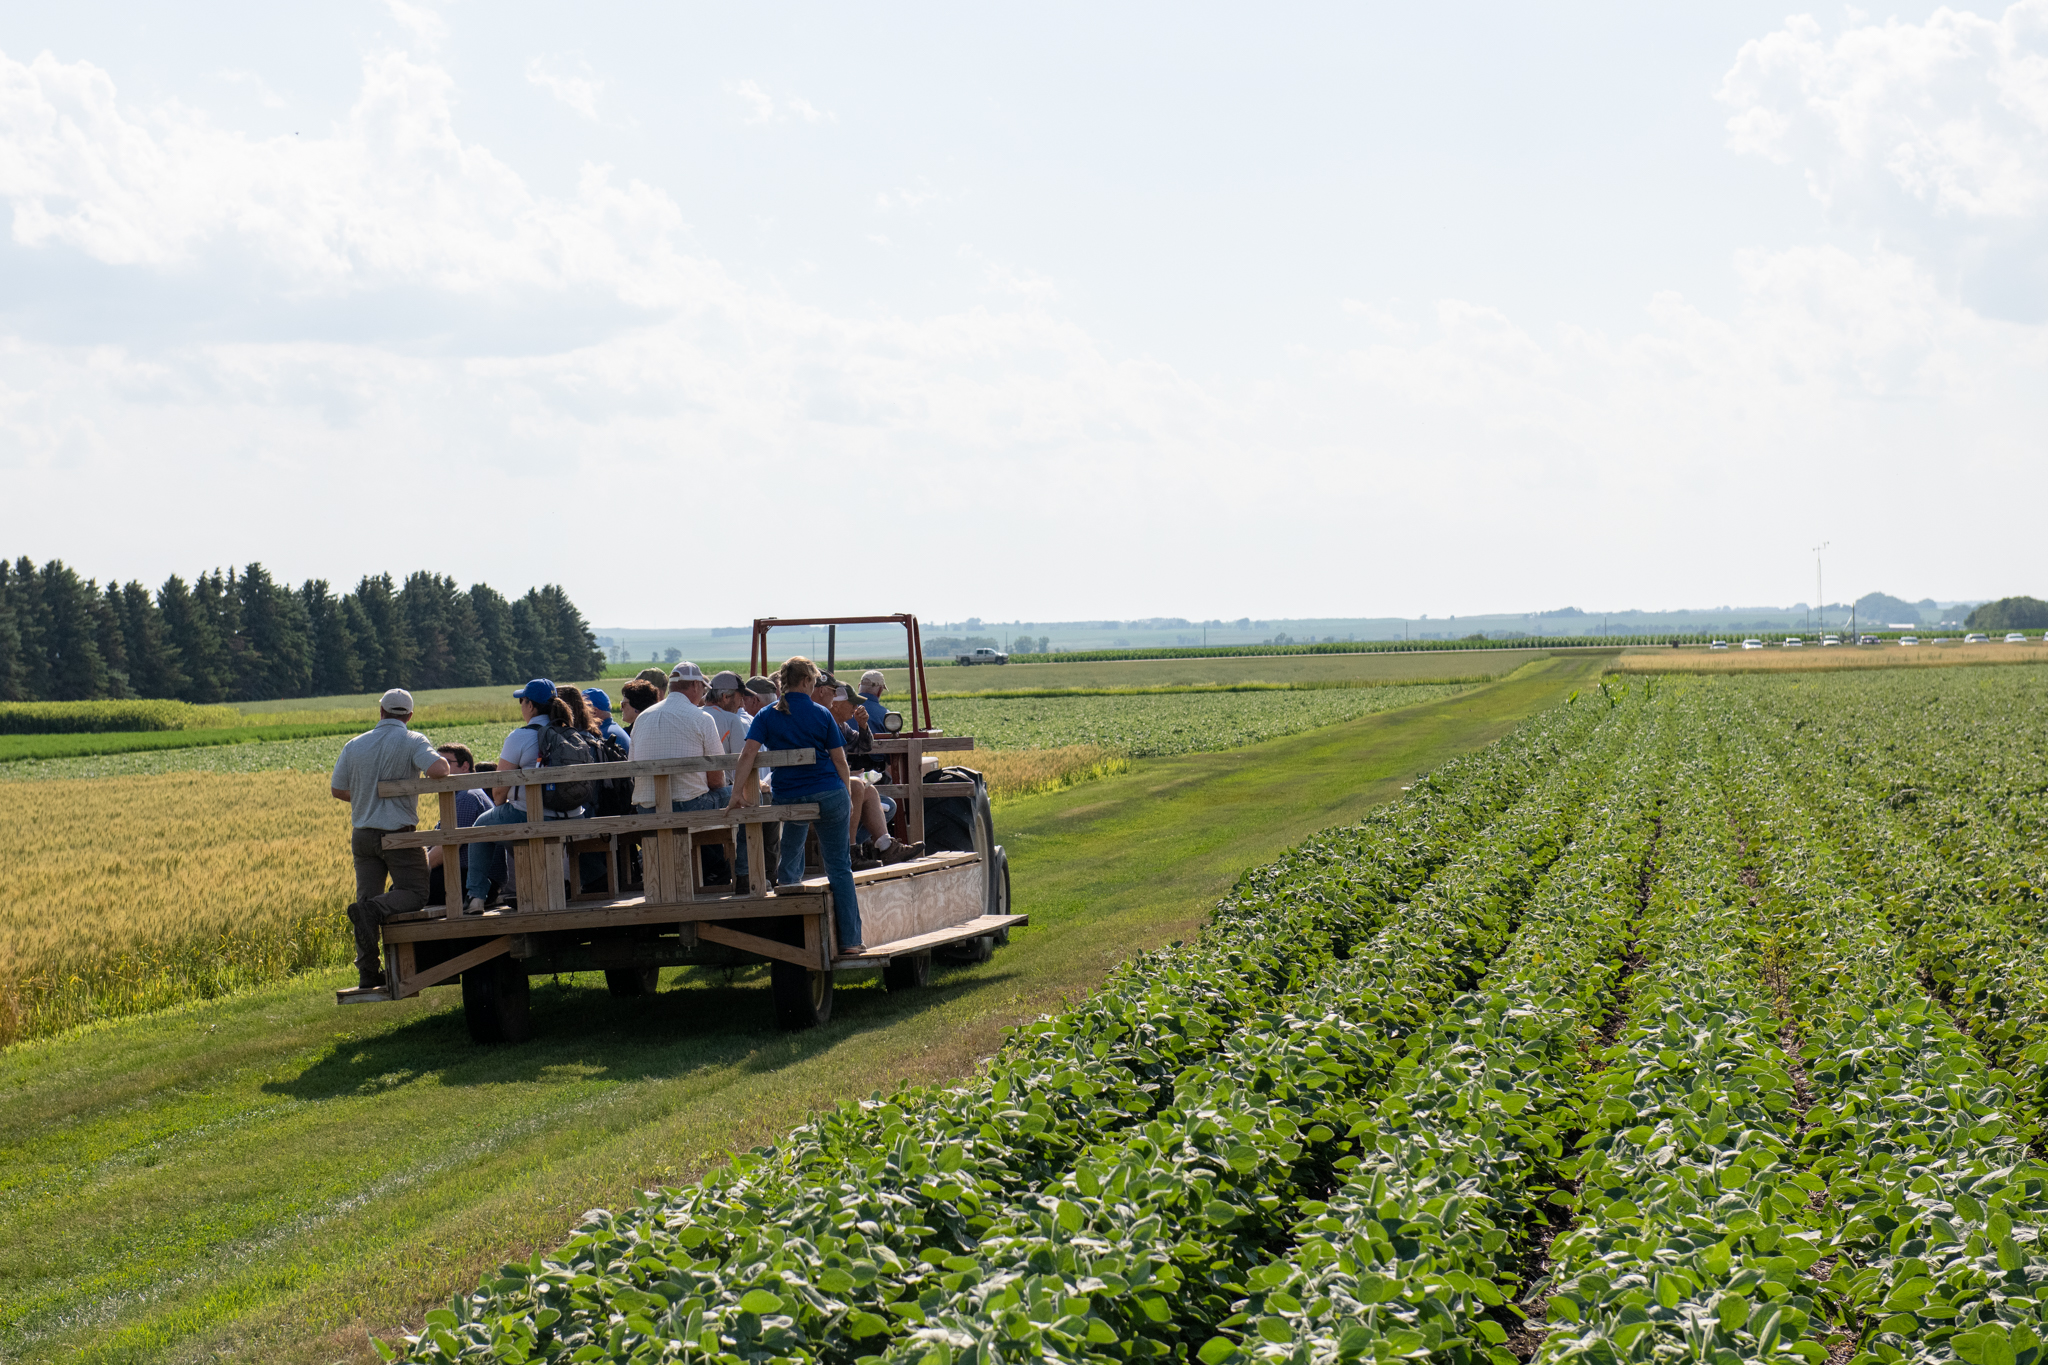 A group of people rides on a trailer through the Northeast Research Farm